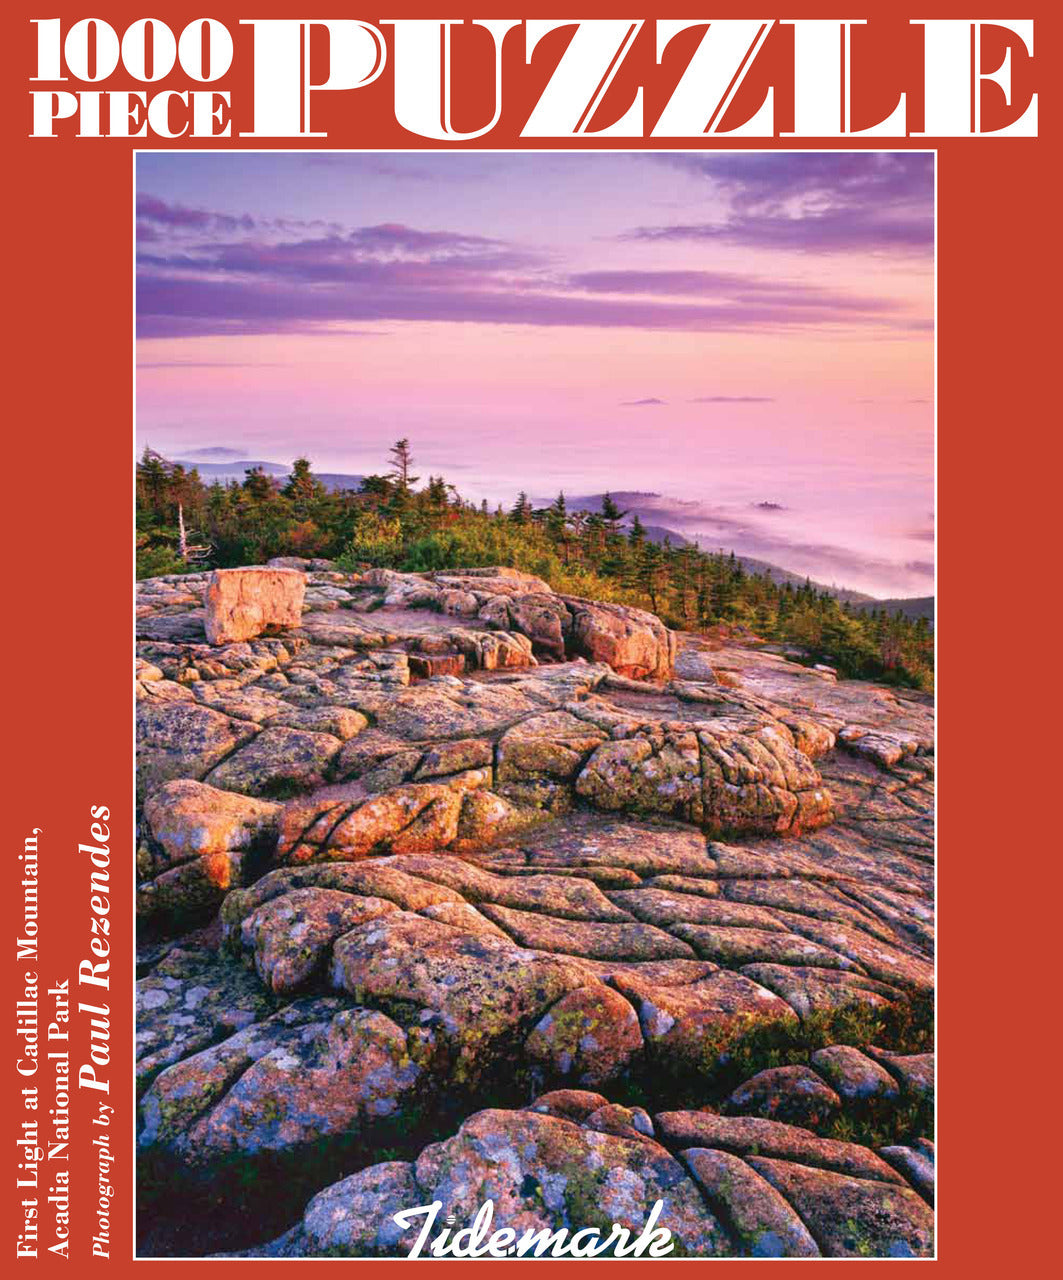 First Light at Cadillac Mountain Acadia National Park by Paul Rezendes, 1000 Piece Puzzle